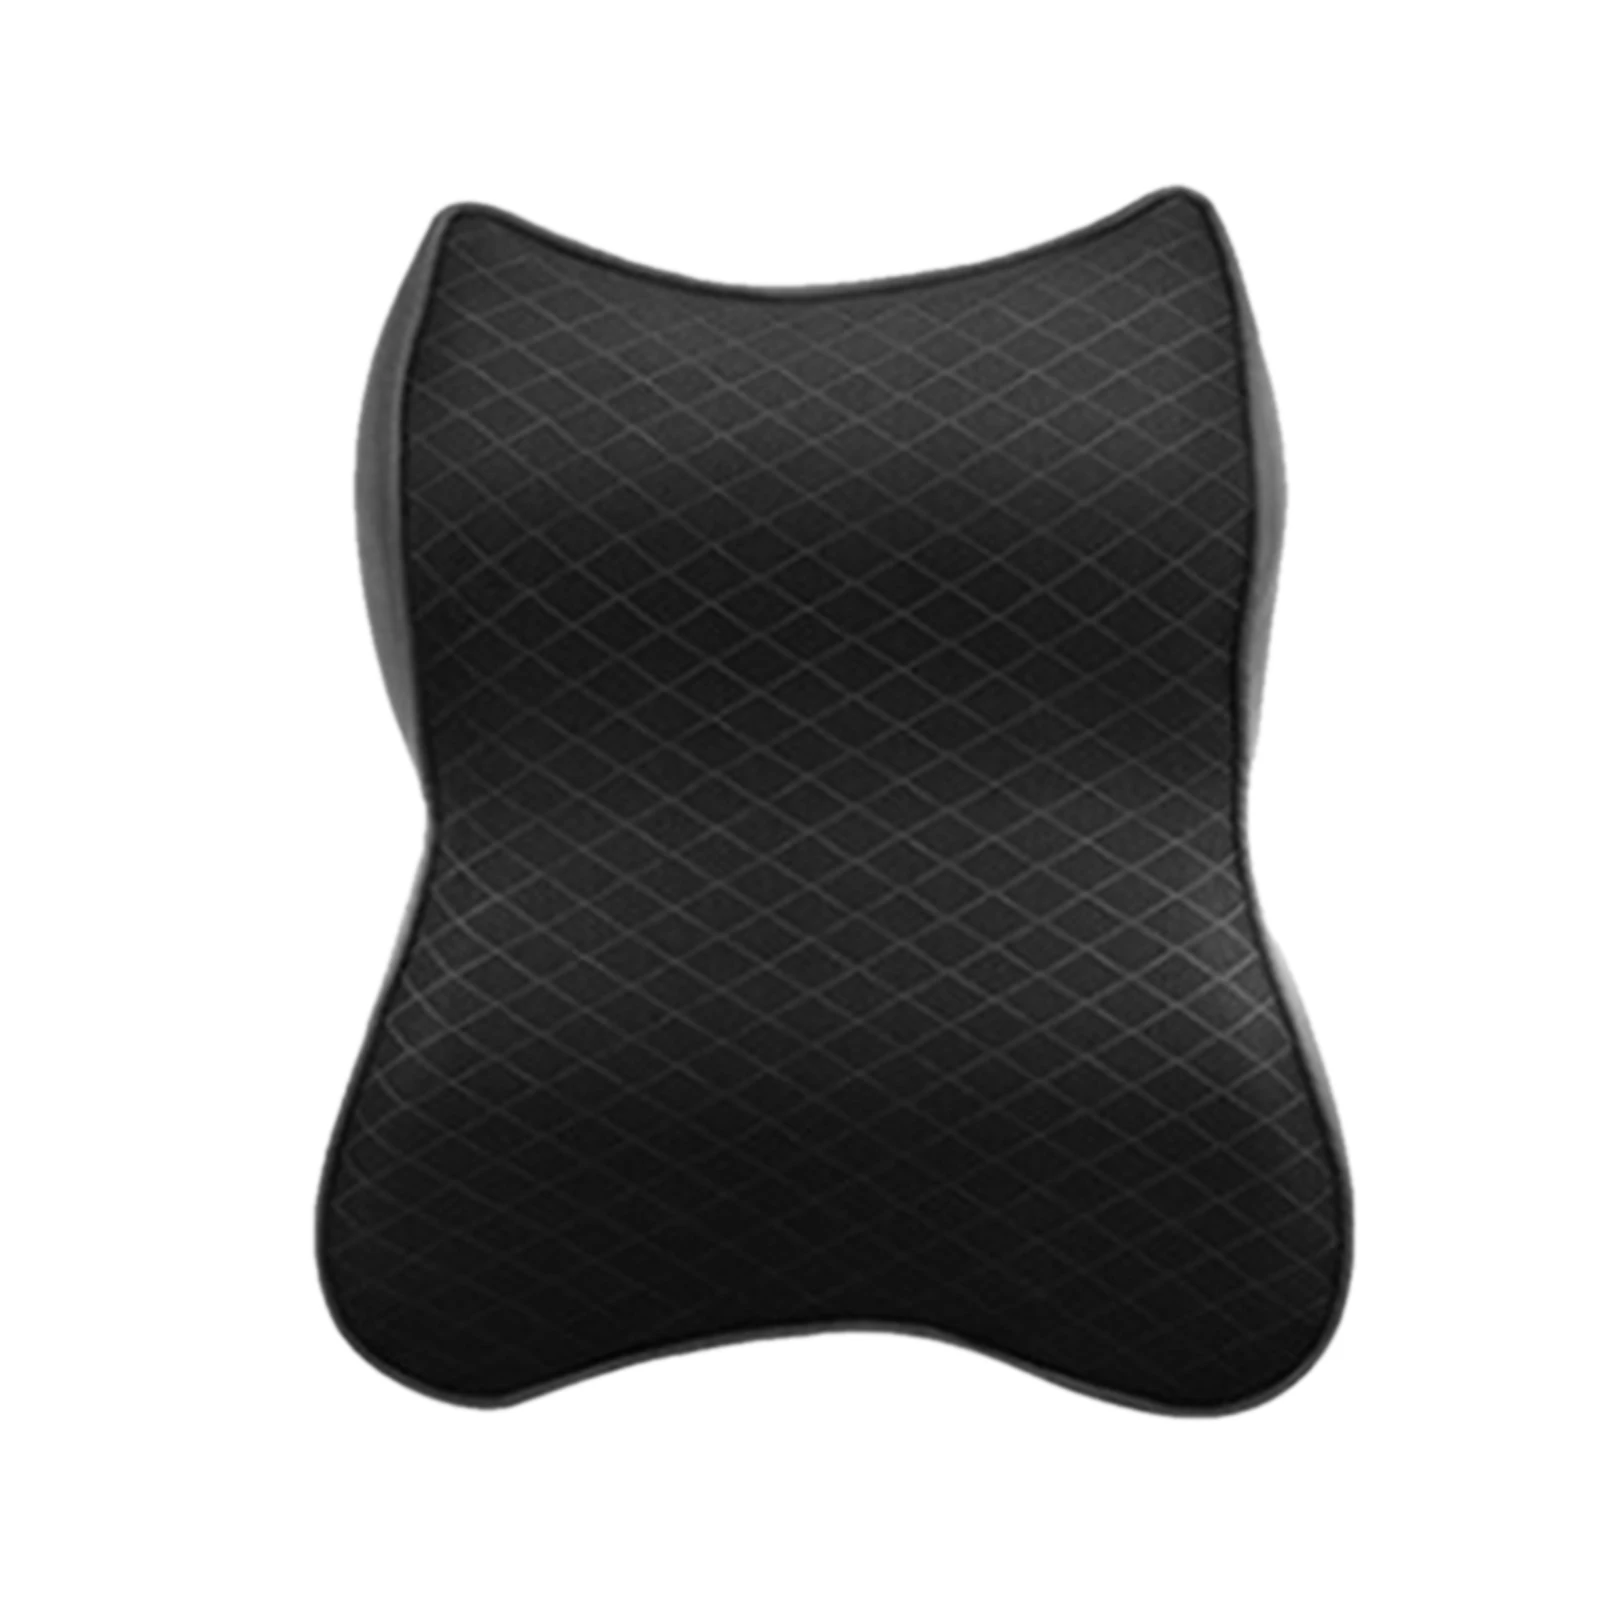 Car Neck Cushion Car Seat Neck Pillow Headrest Cushion for Neck Back Pain Relief Lumbar Support for Car Seat Office Chair